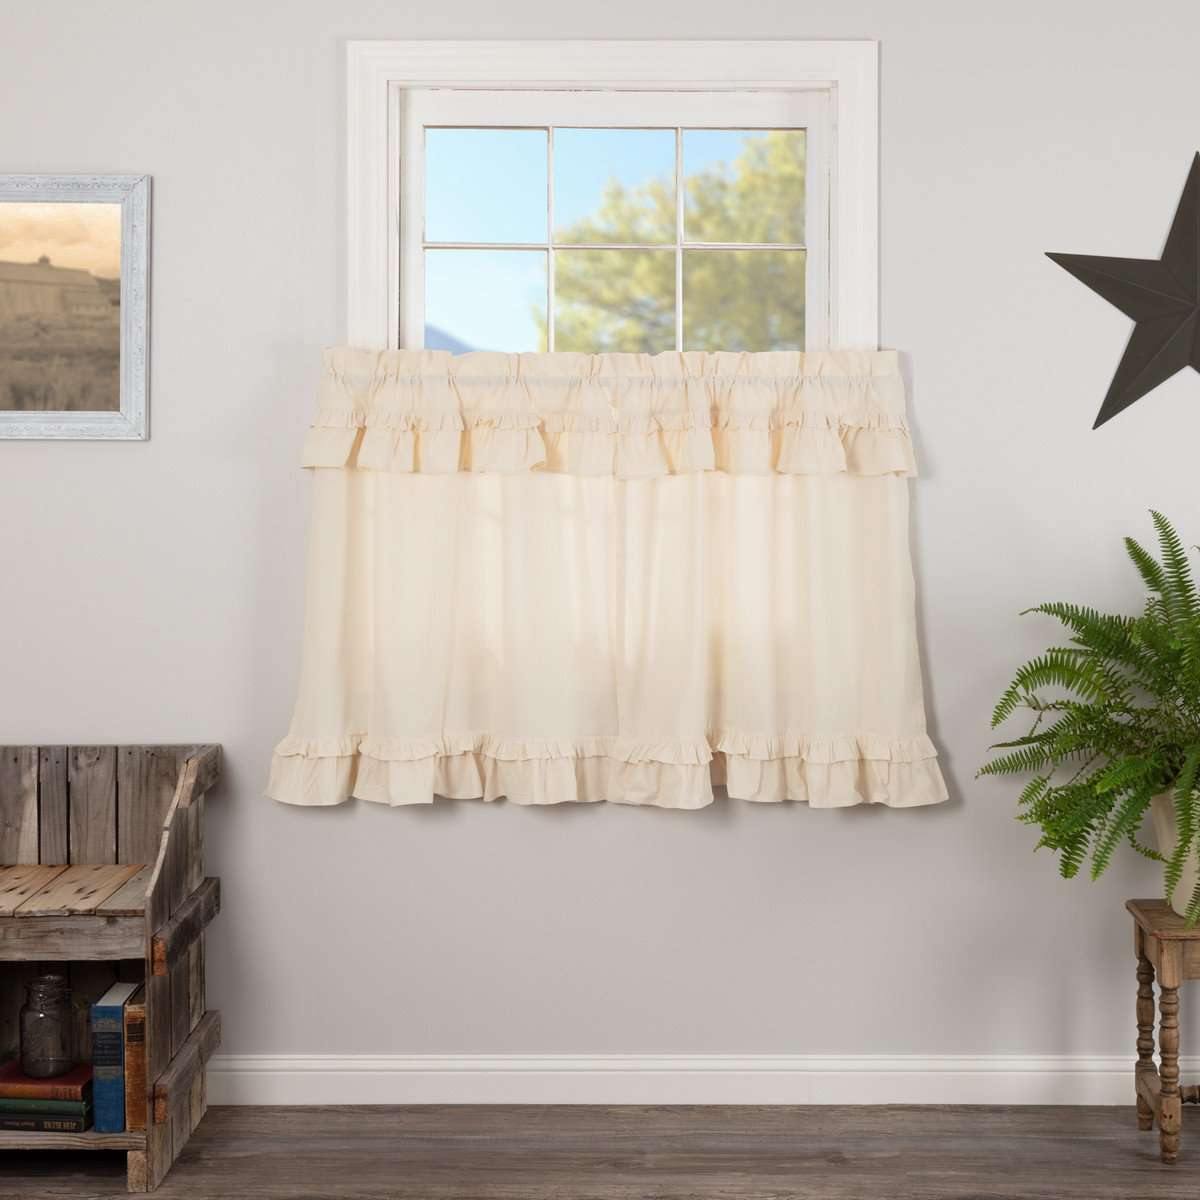 Muslin Ruffled Unbleached Natural Tier Curtain Set of 2 L36xW36 VHC Brands - The Fox Decor